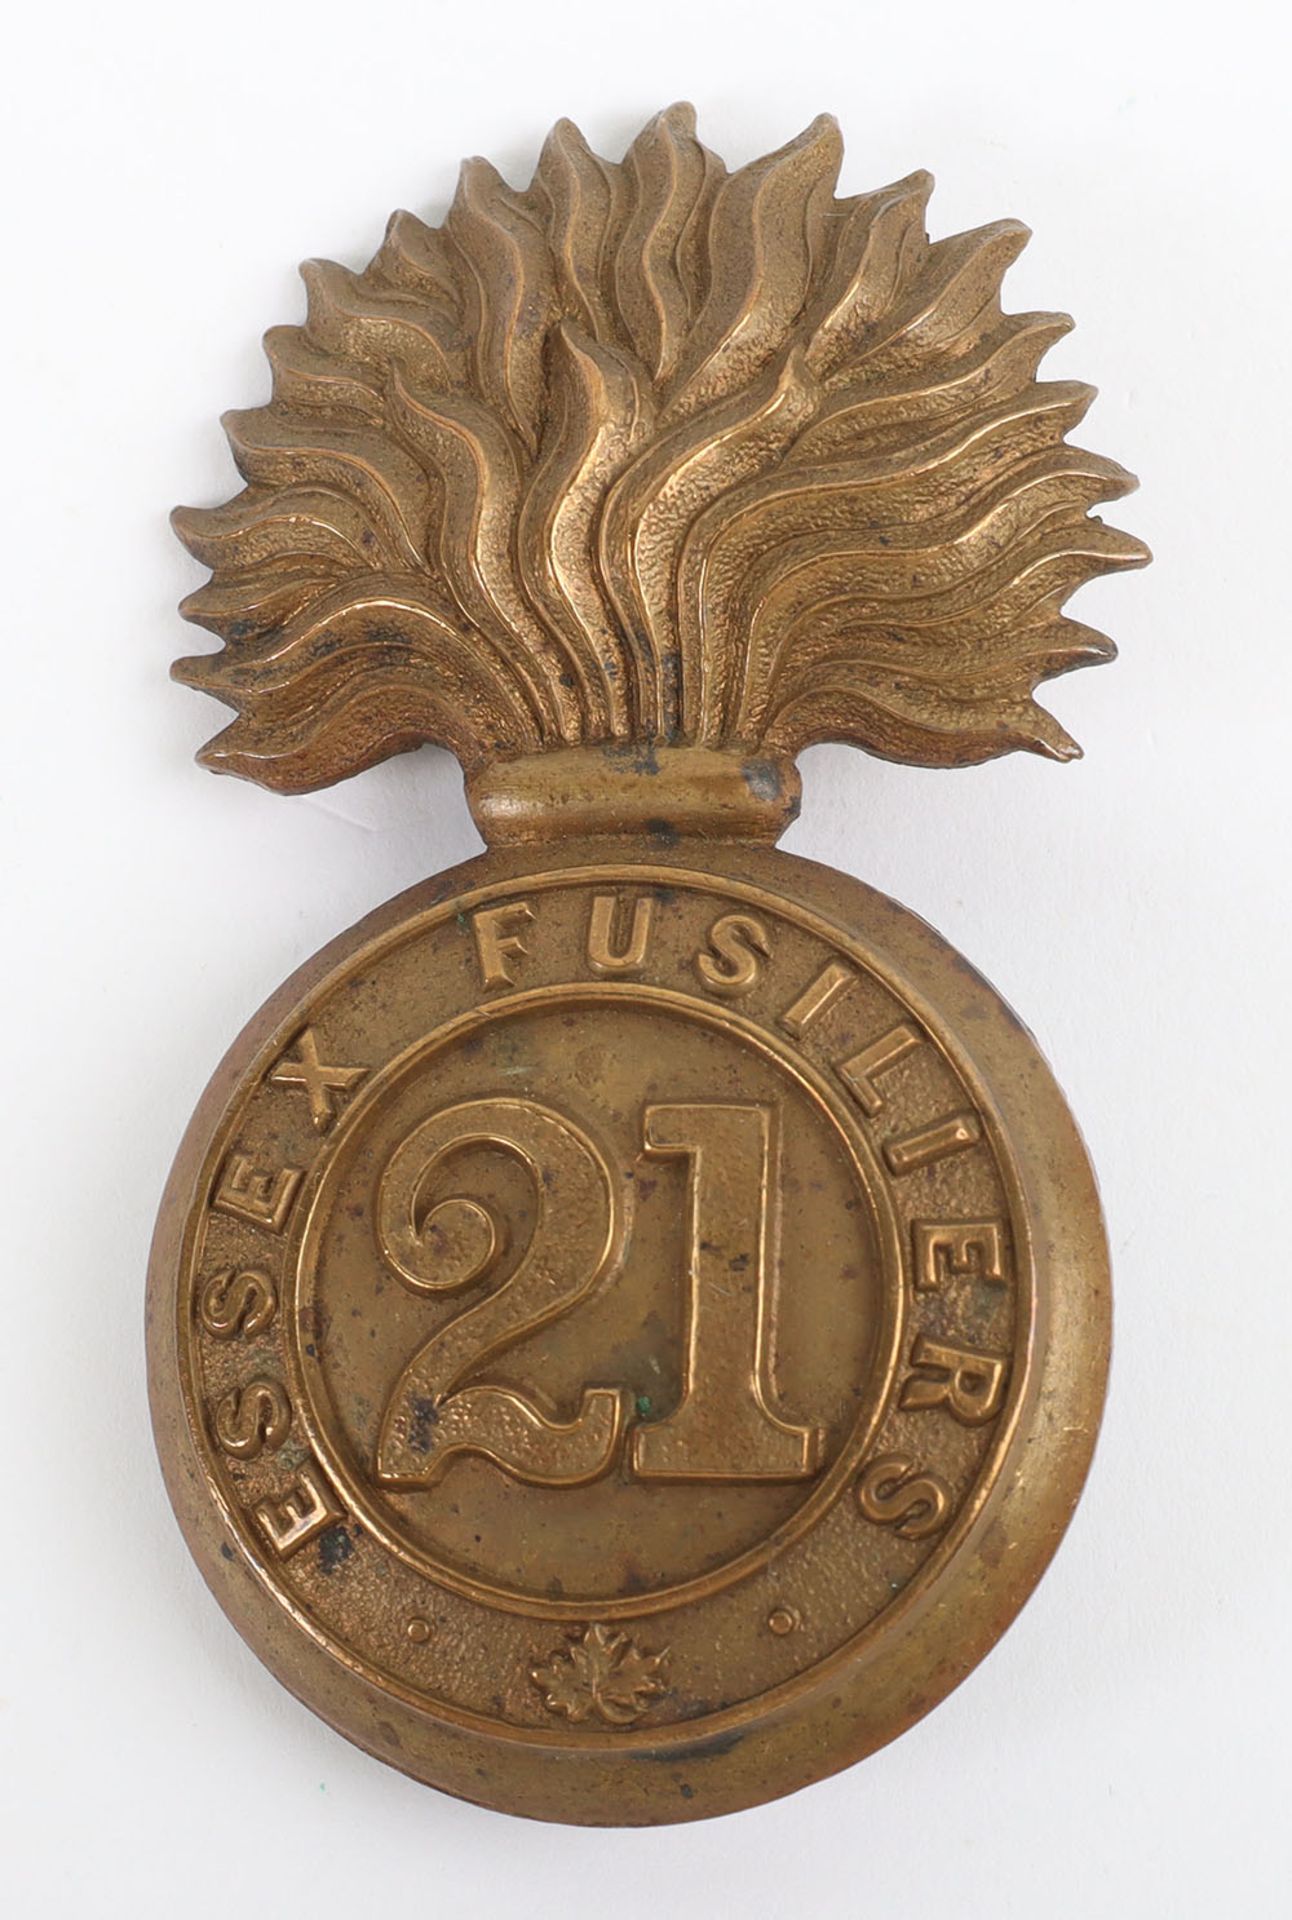 Canadian 21st Essex Fusiliers Busby Grenade 1912-14